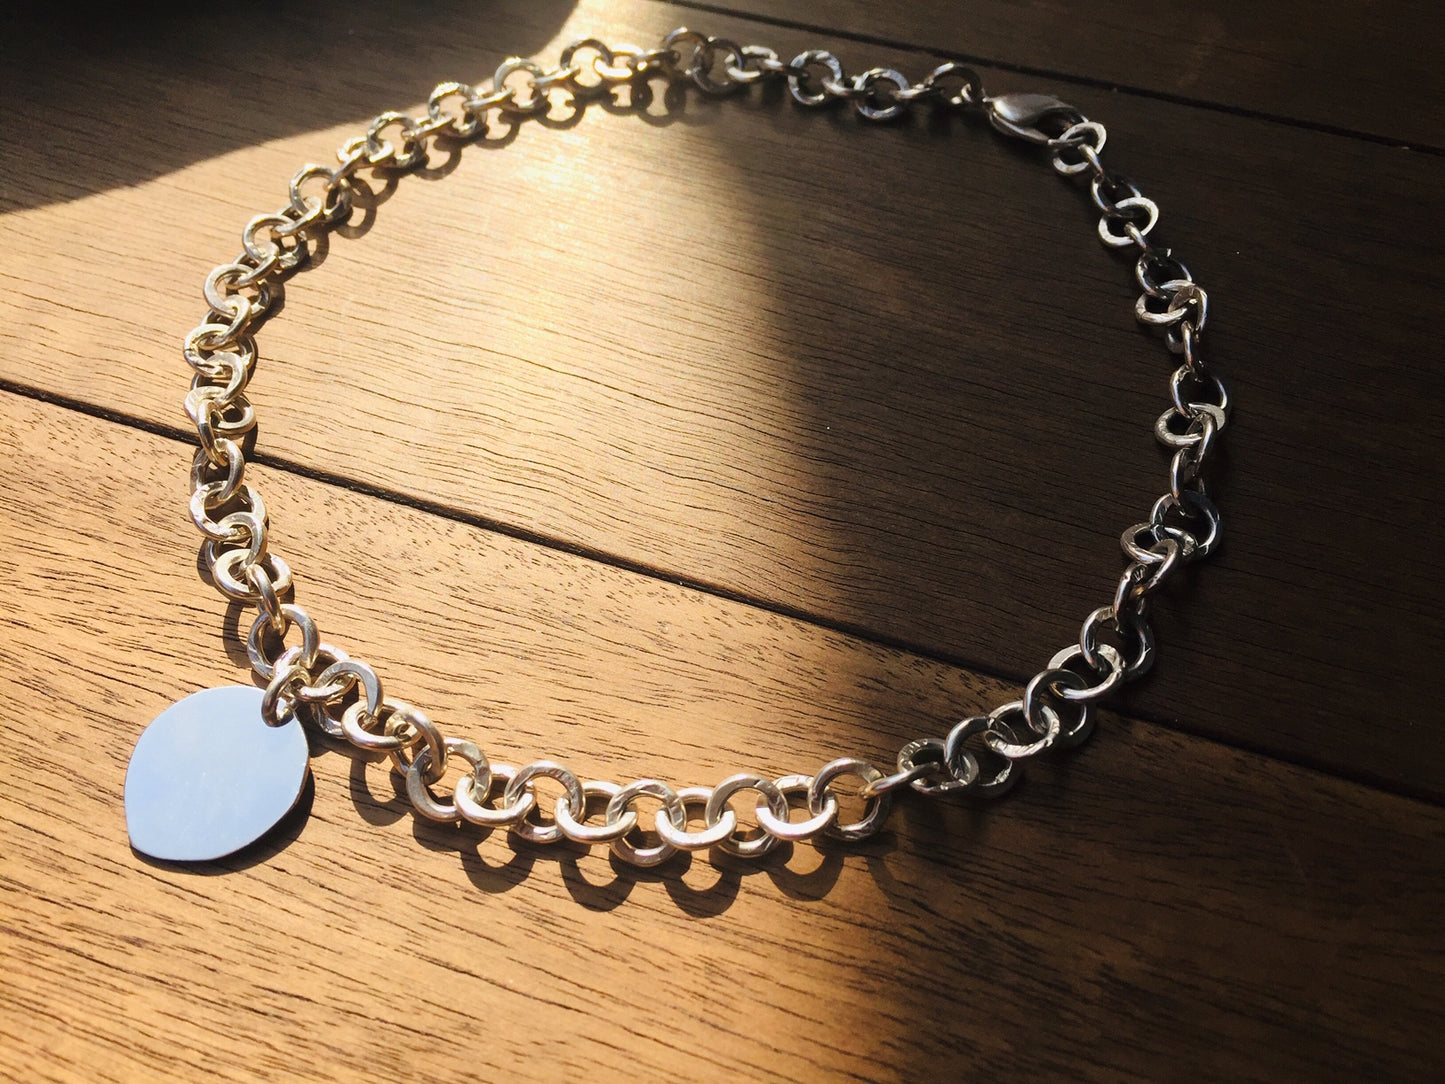 Sterling Silver925 Unique Coin / Medallion Charm & Circle Link Chain Necklace / Choker For Men &Women ユニセックス・シルバー・コインモチーフ・リンクチェーン・ネックレス・チョーカー・チャンキー・ストリート・ハードウェア